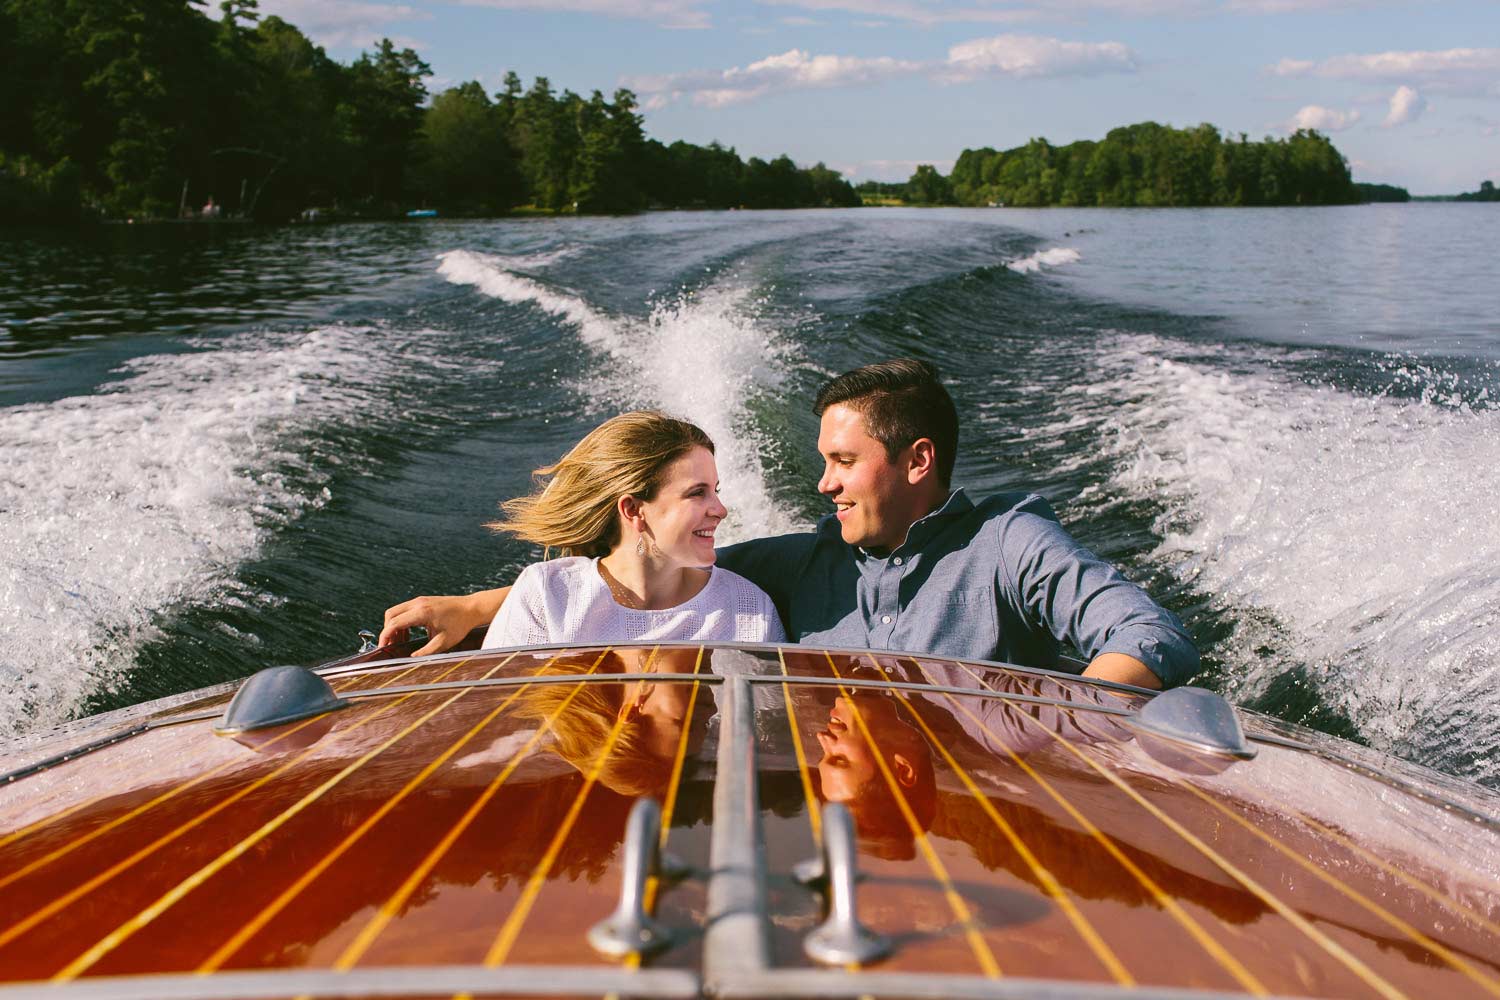 engagement photograph in cottage country on a boat (Copy)